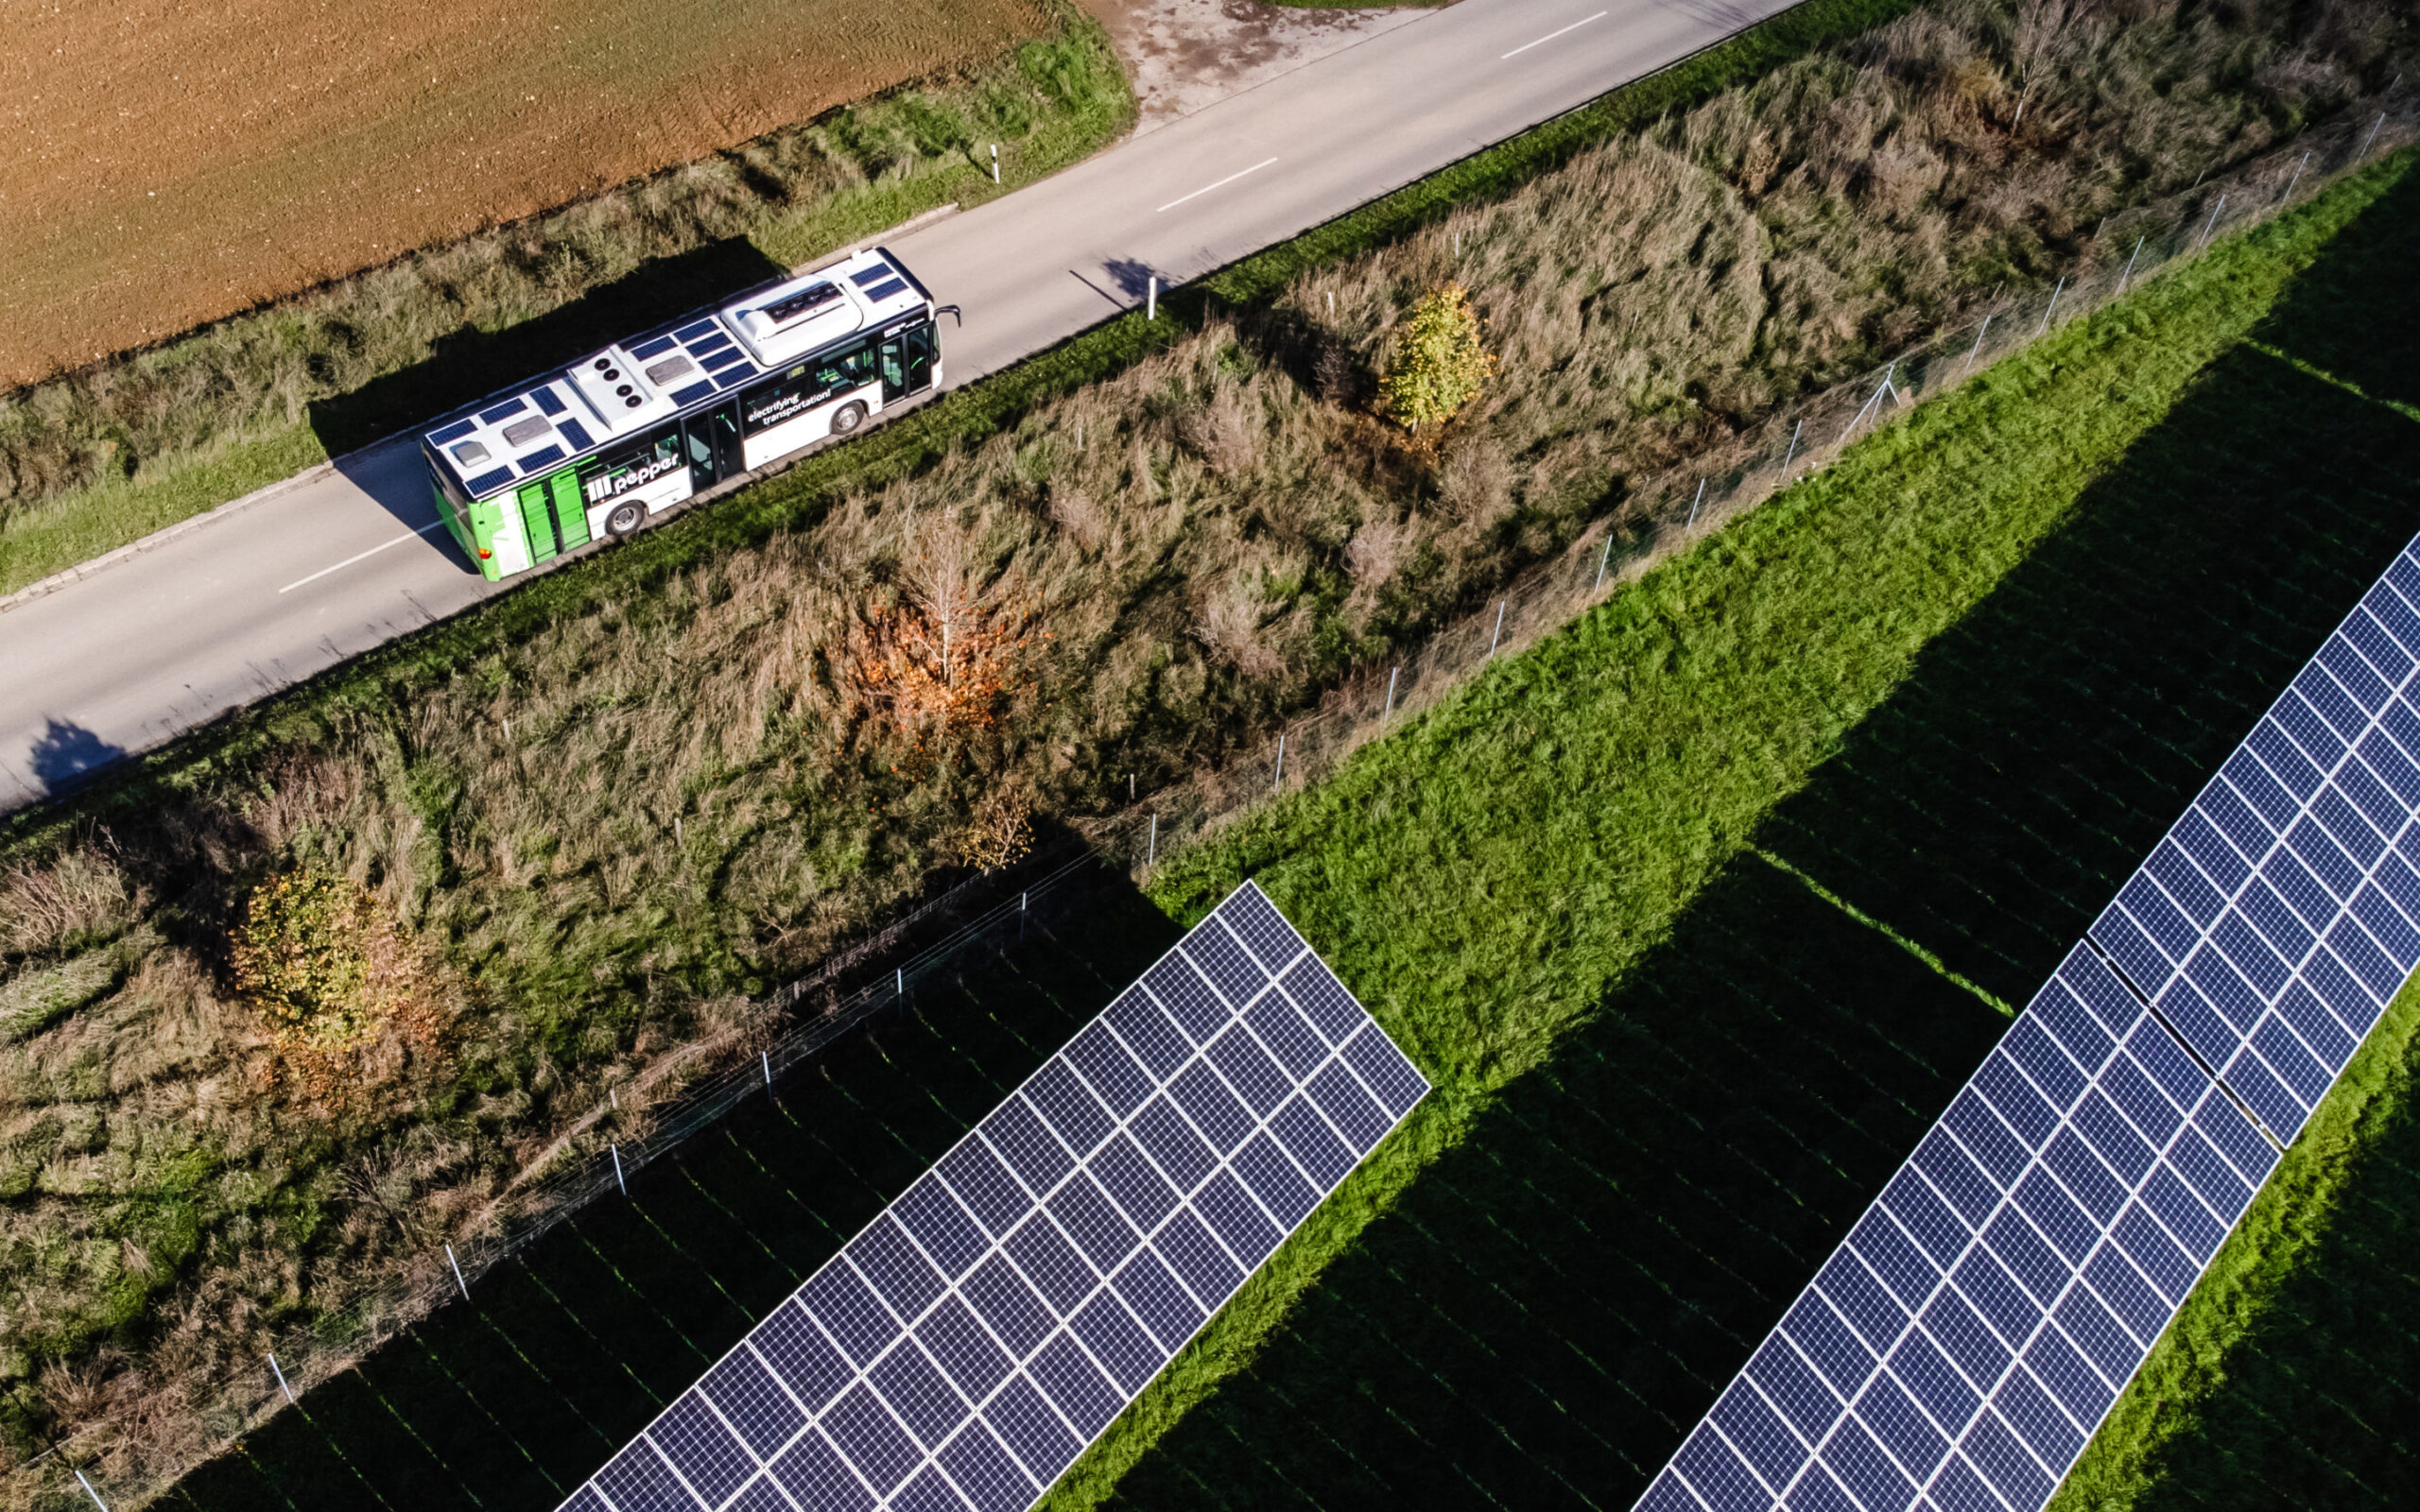 https://e-vehicleinfo.com/global/sono-motors-and-pepper-launch-solar-powered-electric-bus/